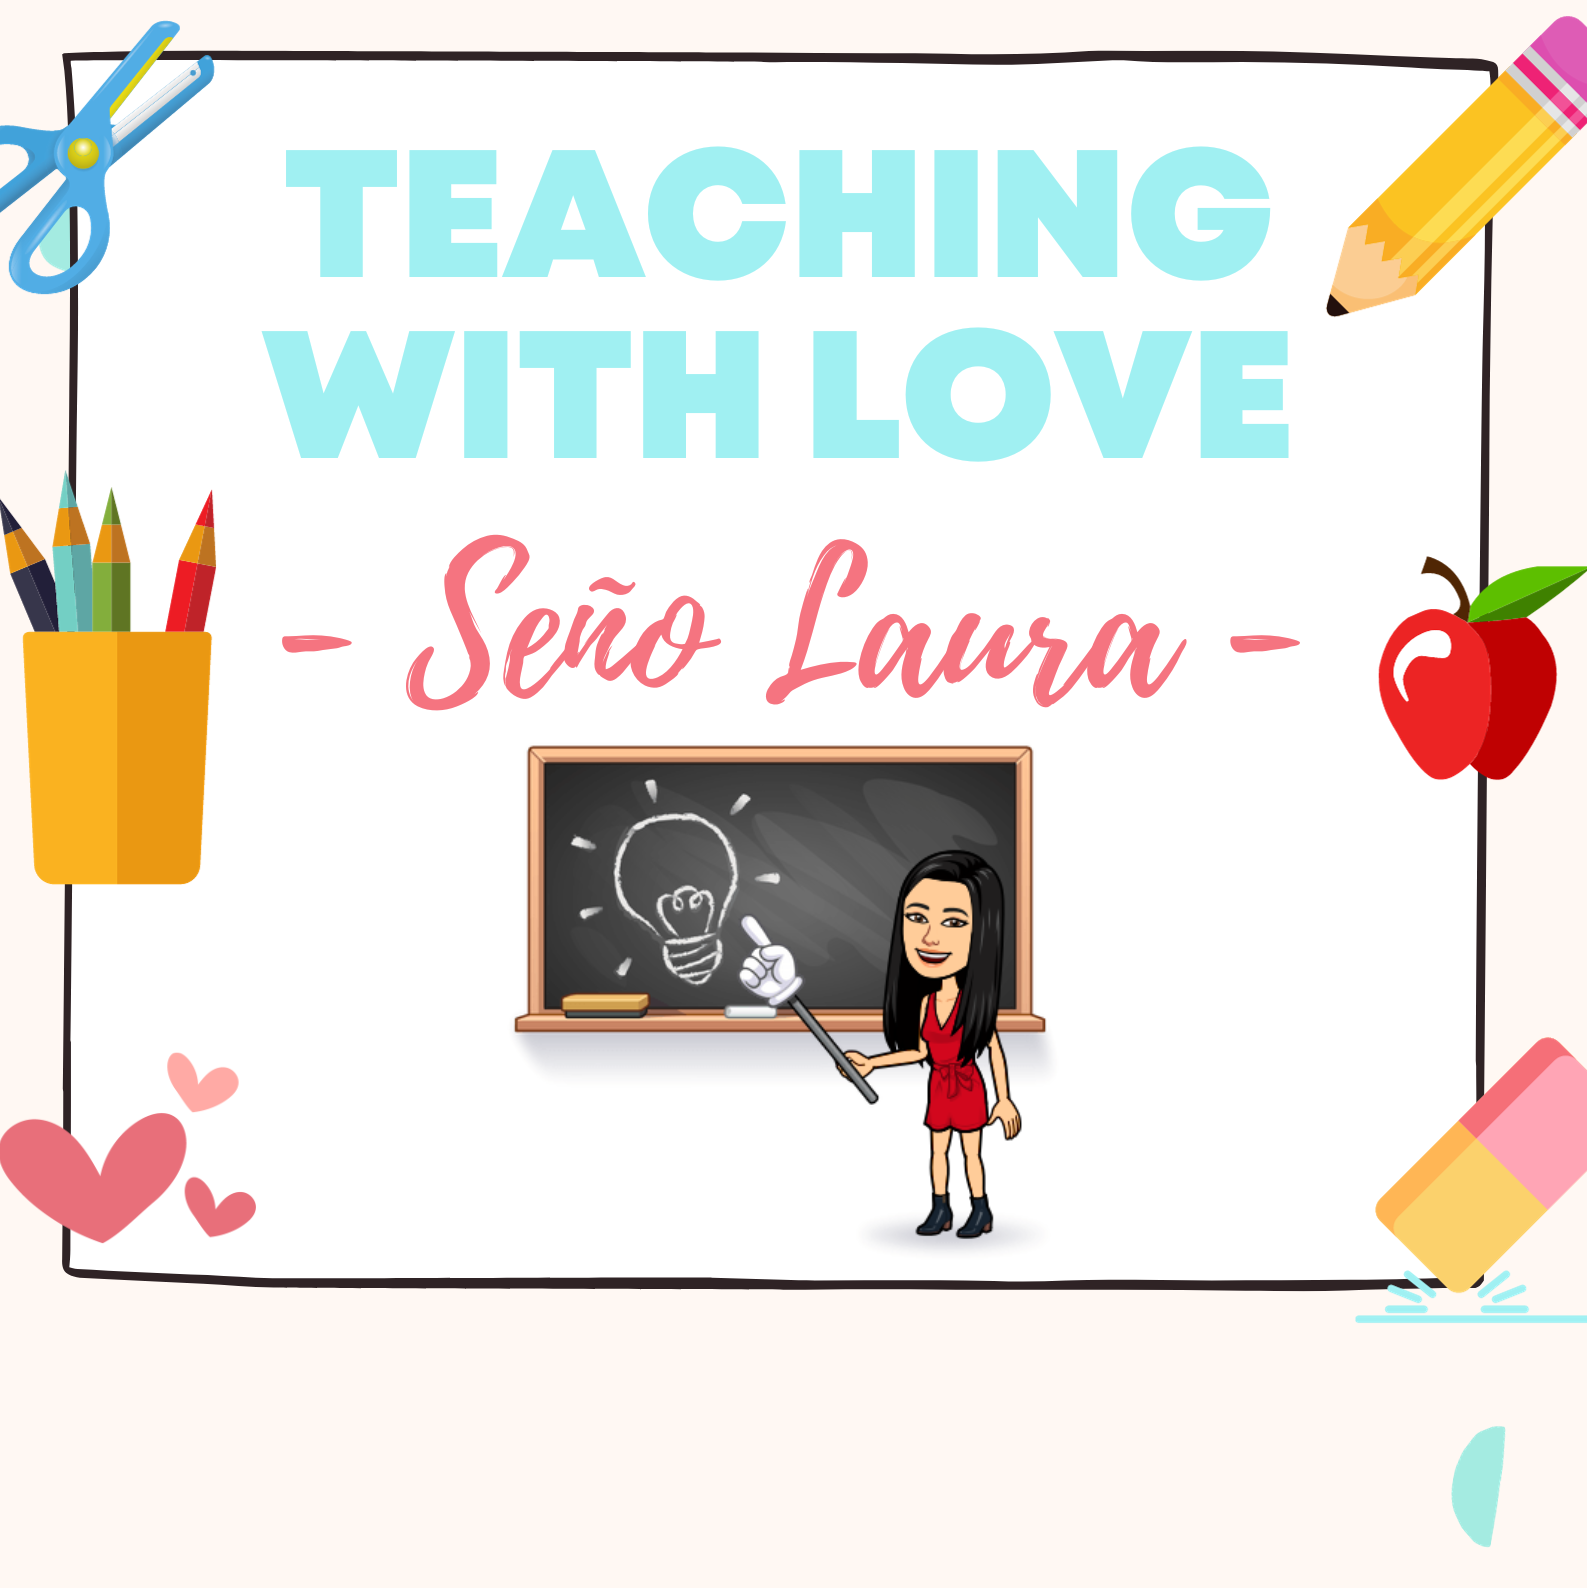 TEACHING WITH LOVE